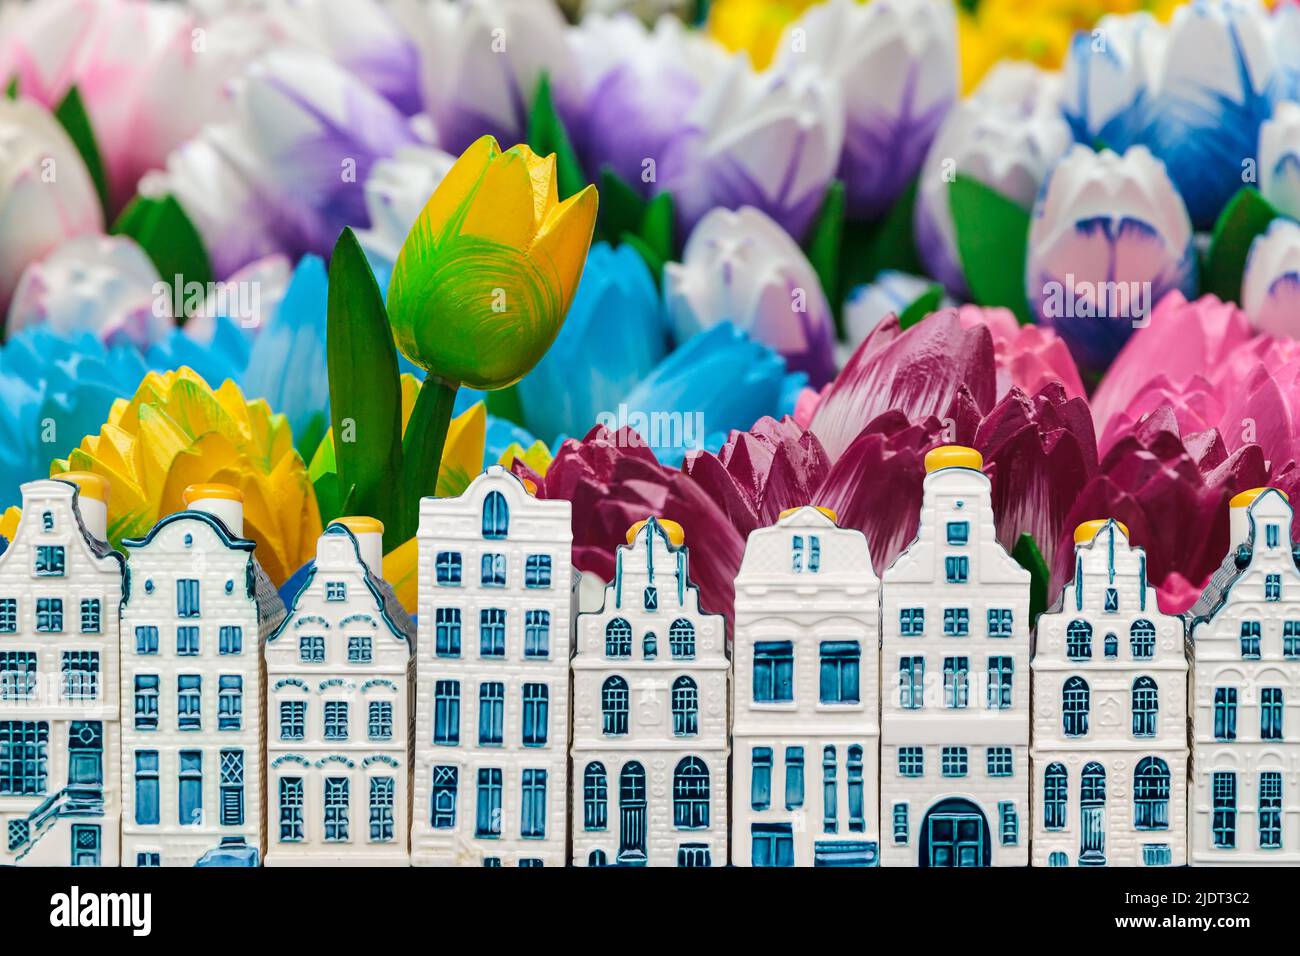 Colorful wooden tulips with small souvenir Amsterdam canal houses in front Stock Photo